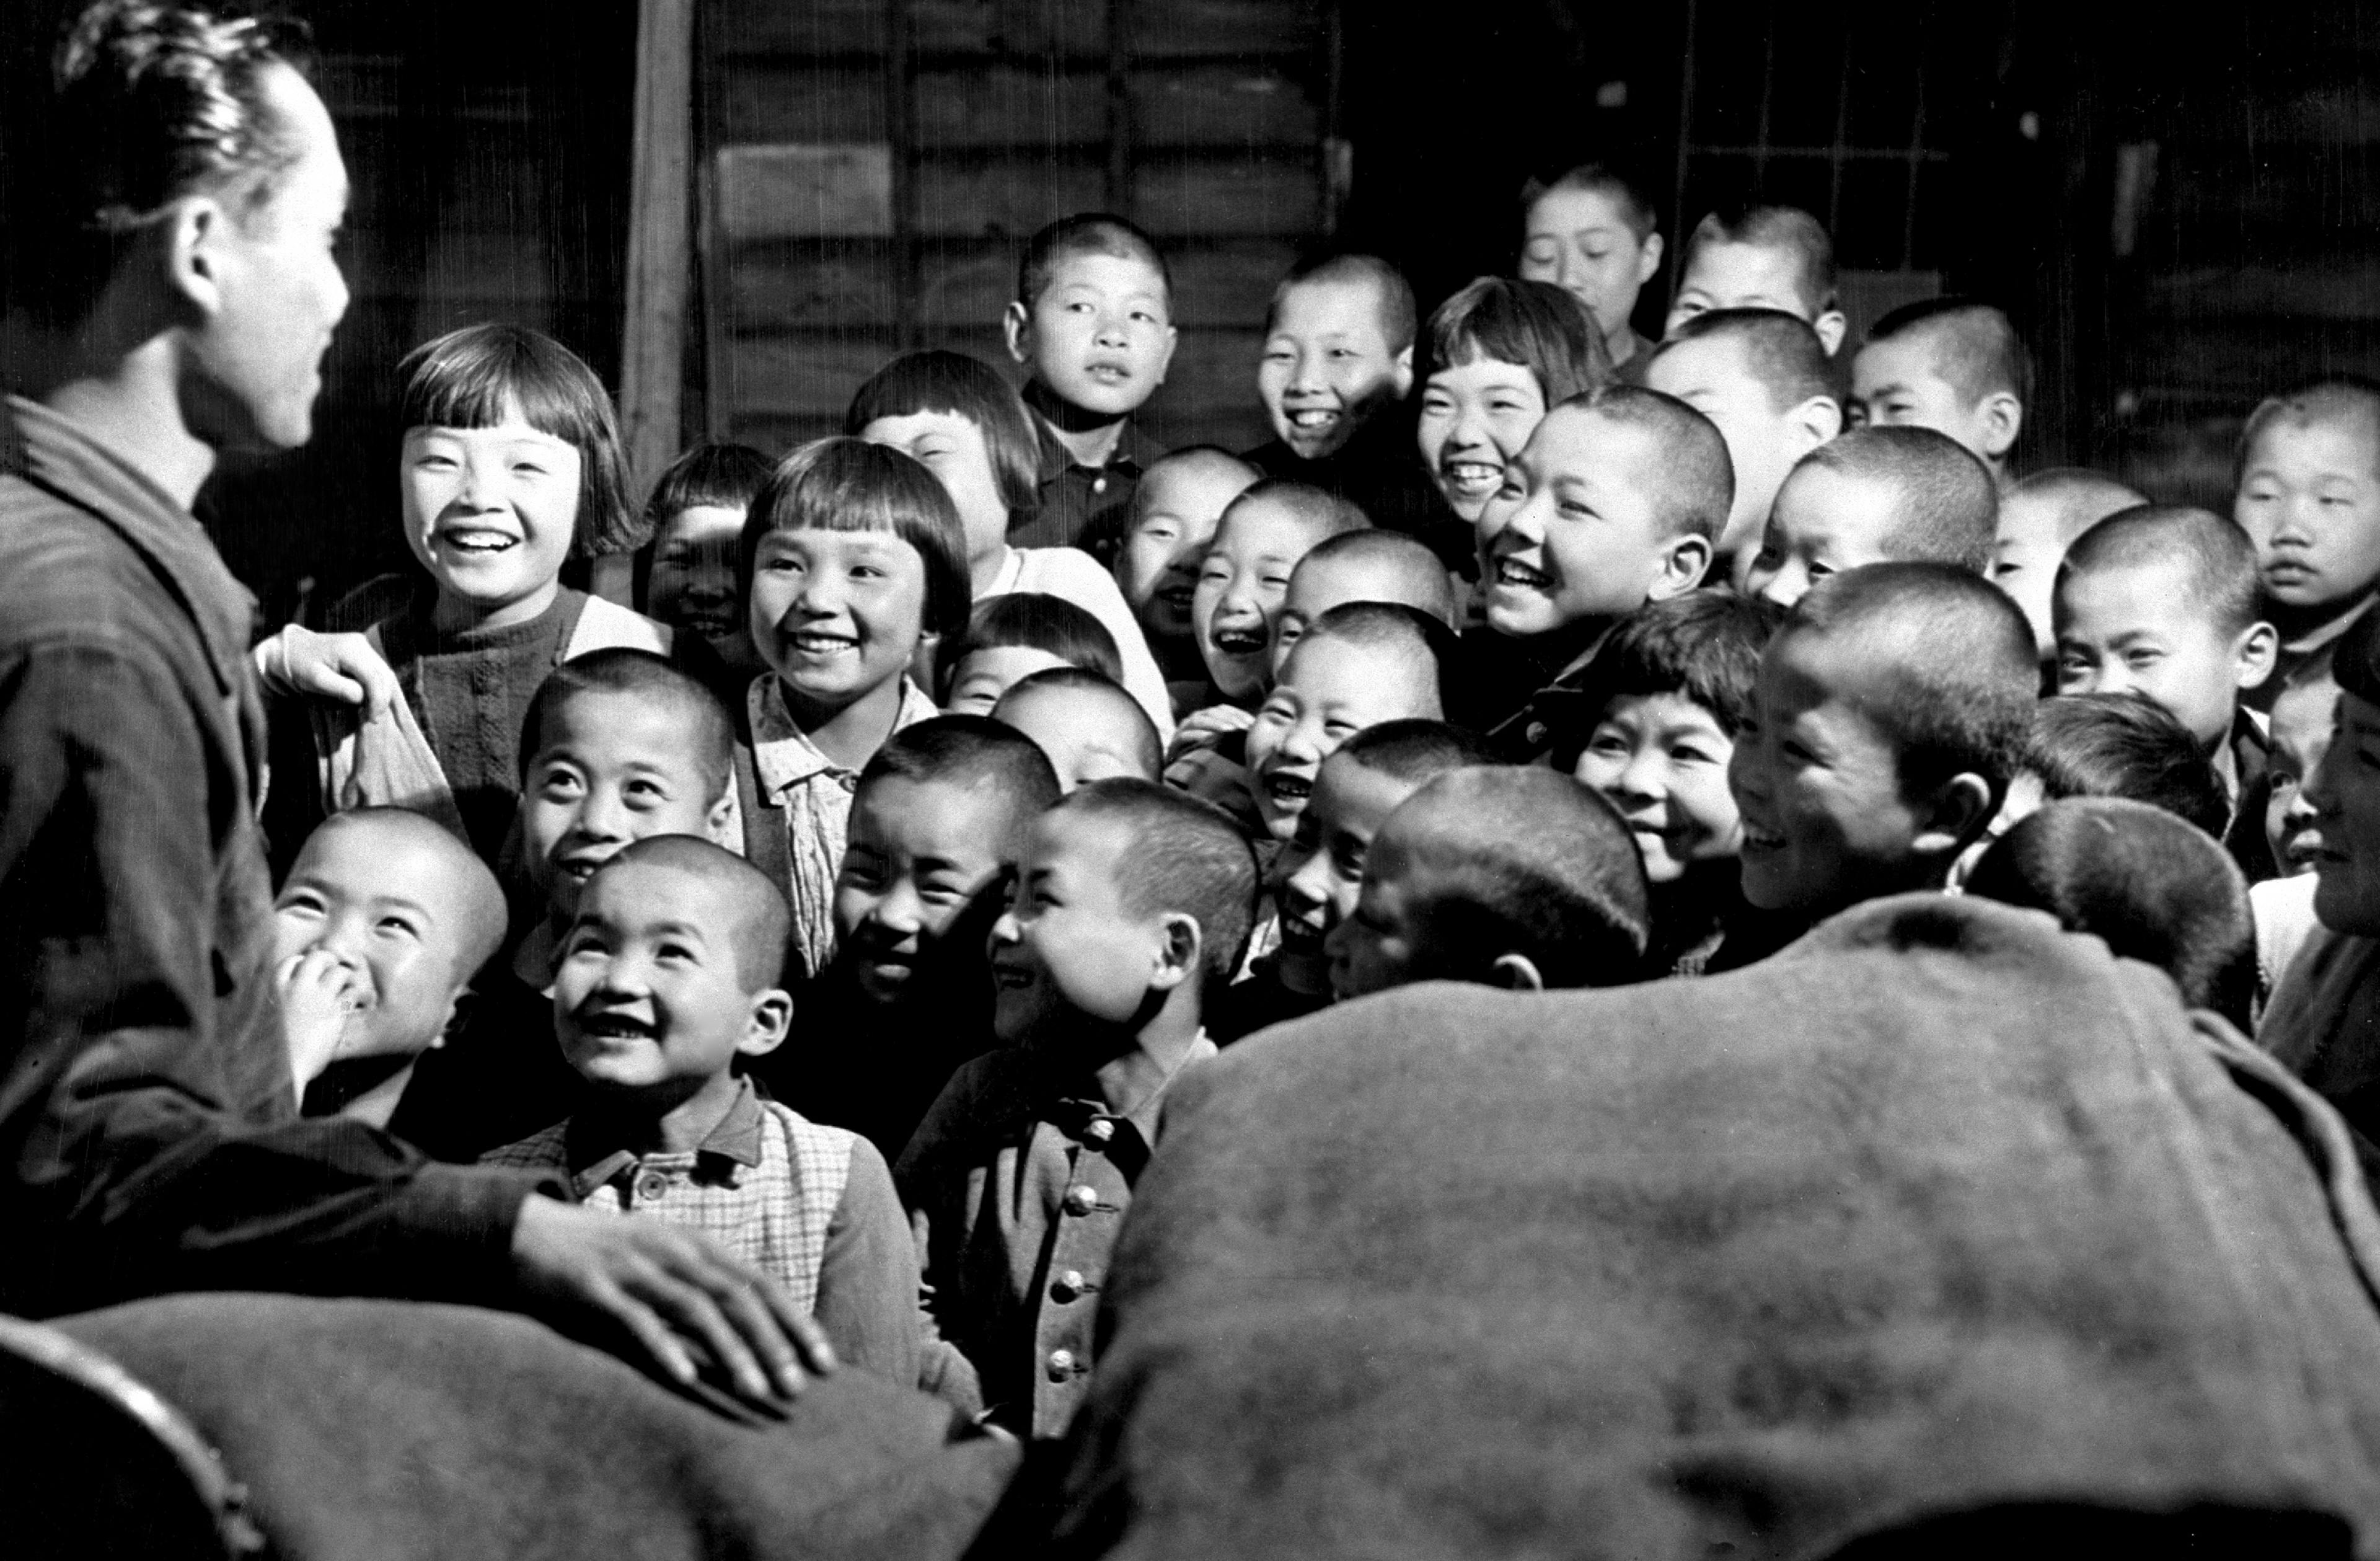 Children from disaster-stricken families affected by typhoons in the city of Saga, Japan smile as they wait to receive blankets supplied with UNICEF's assistance.